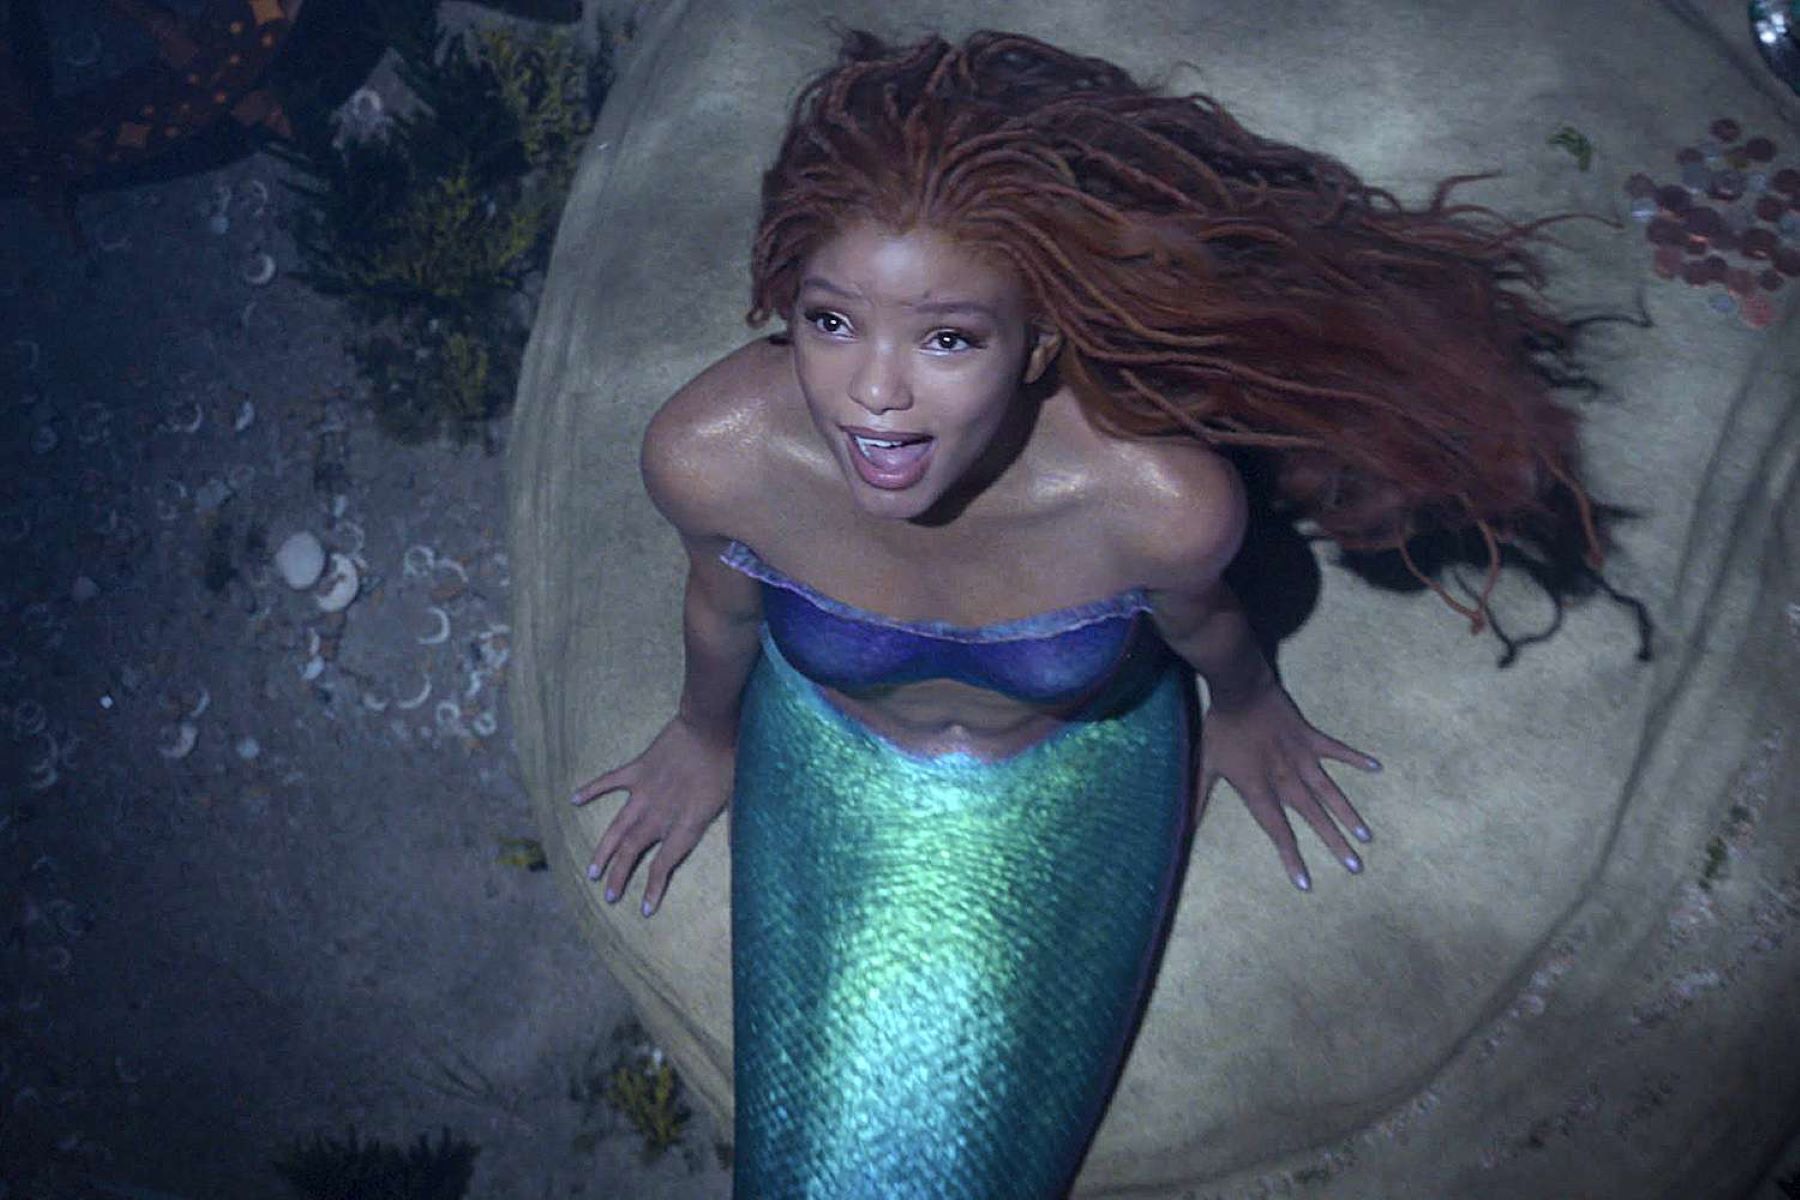 Controversy Erupts Over Flounder's Portrayal In Live Action 'Little Mermaid' Adaptation